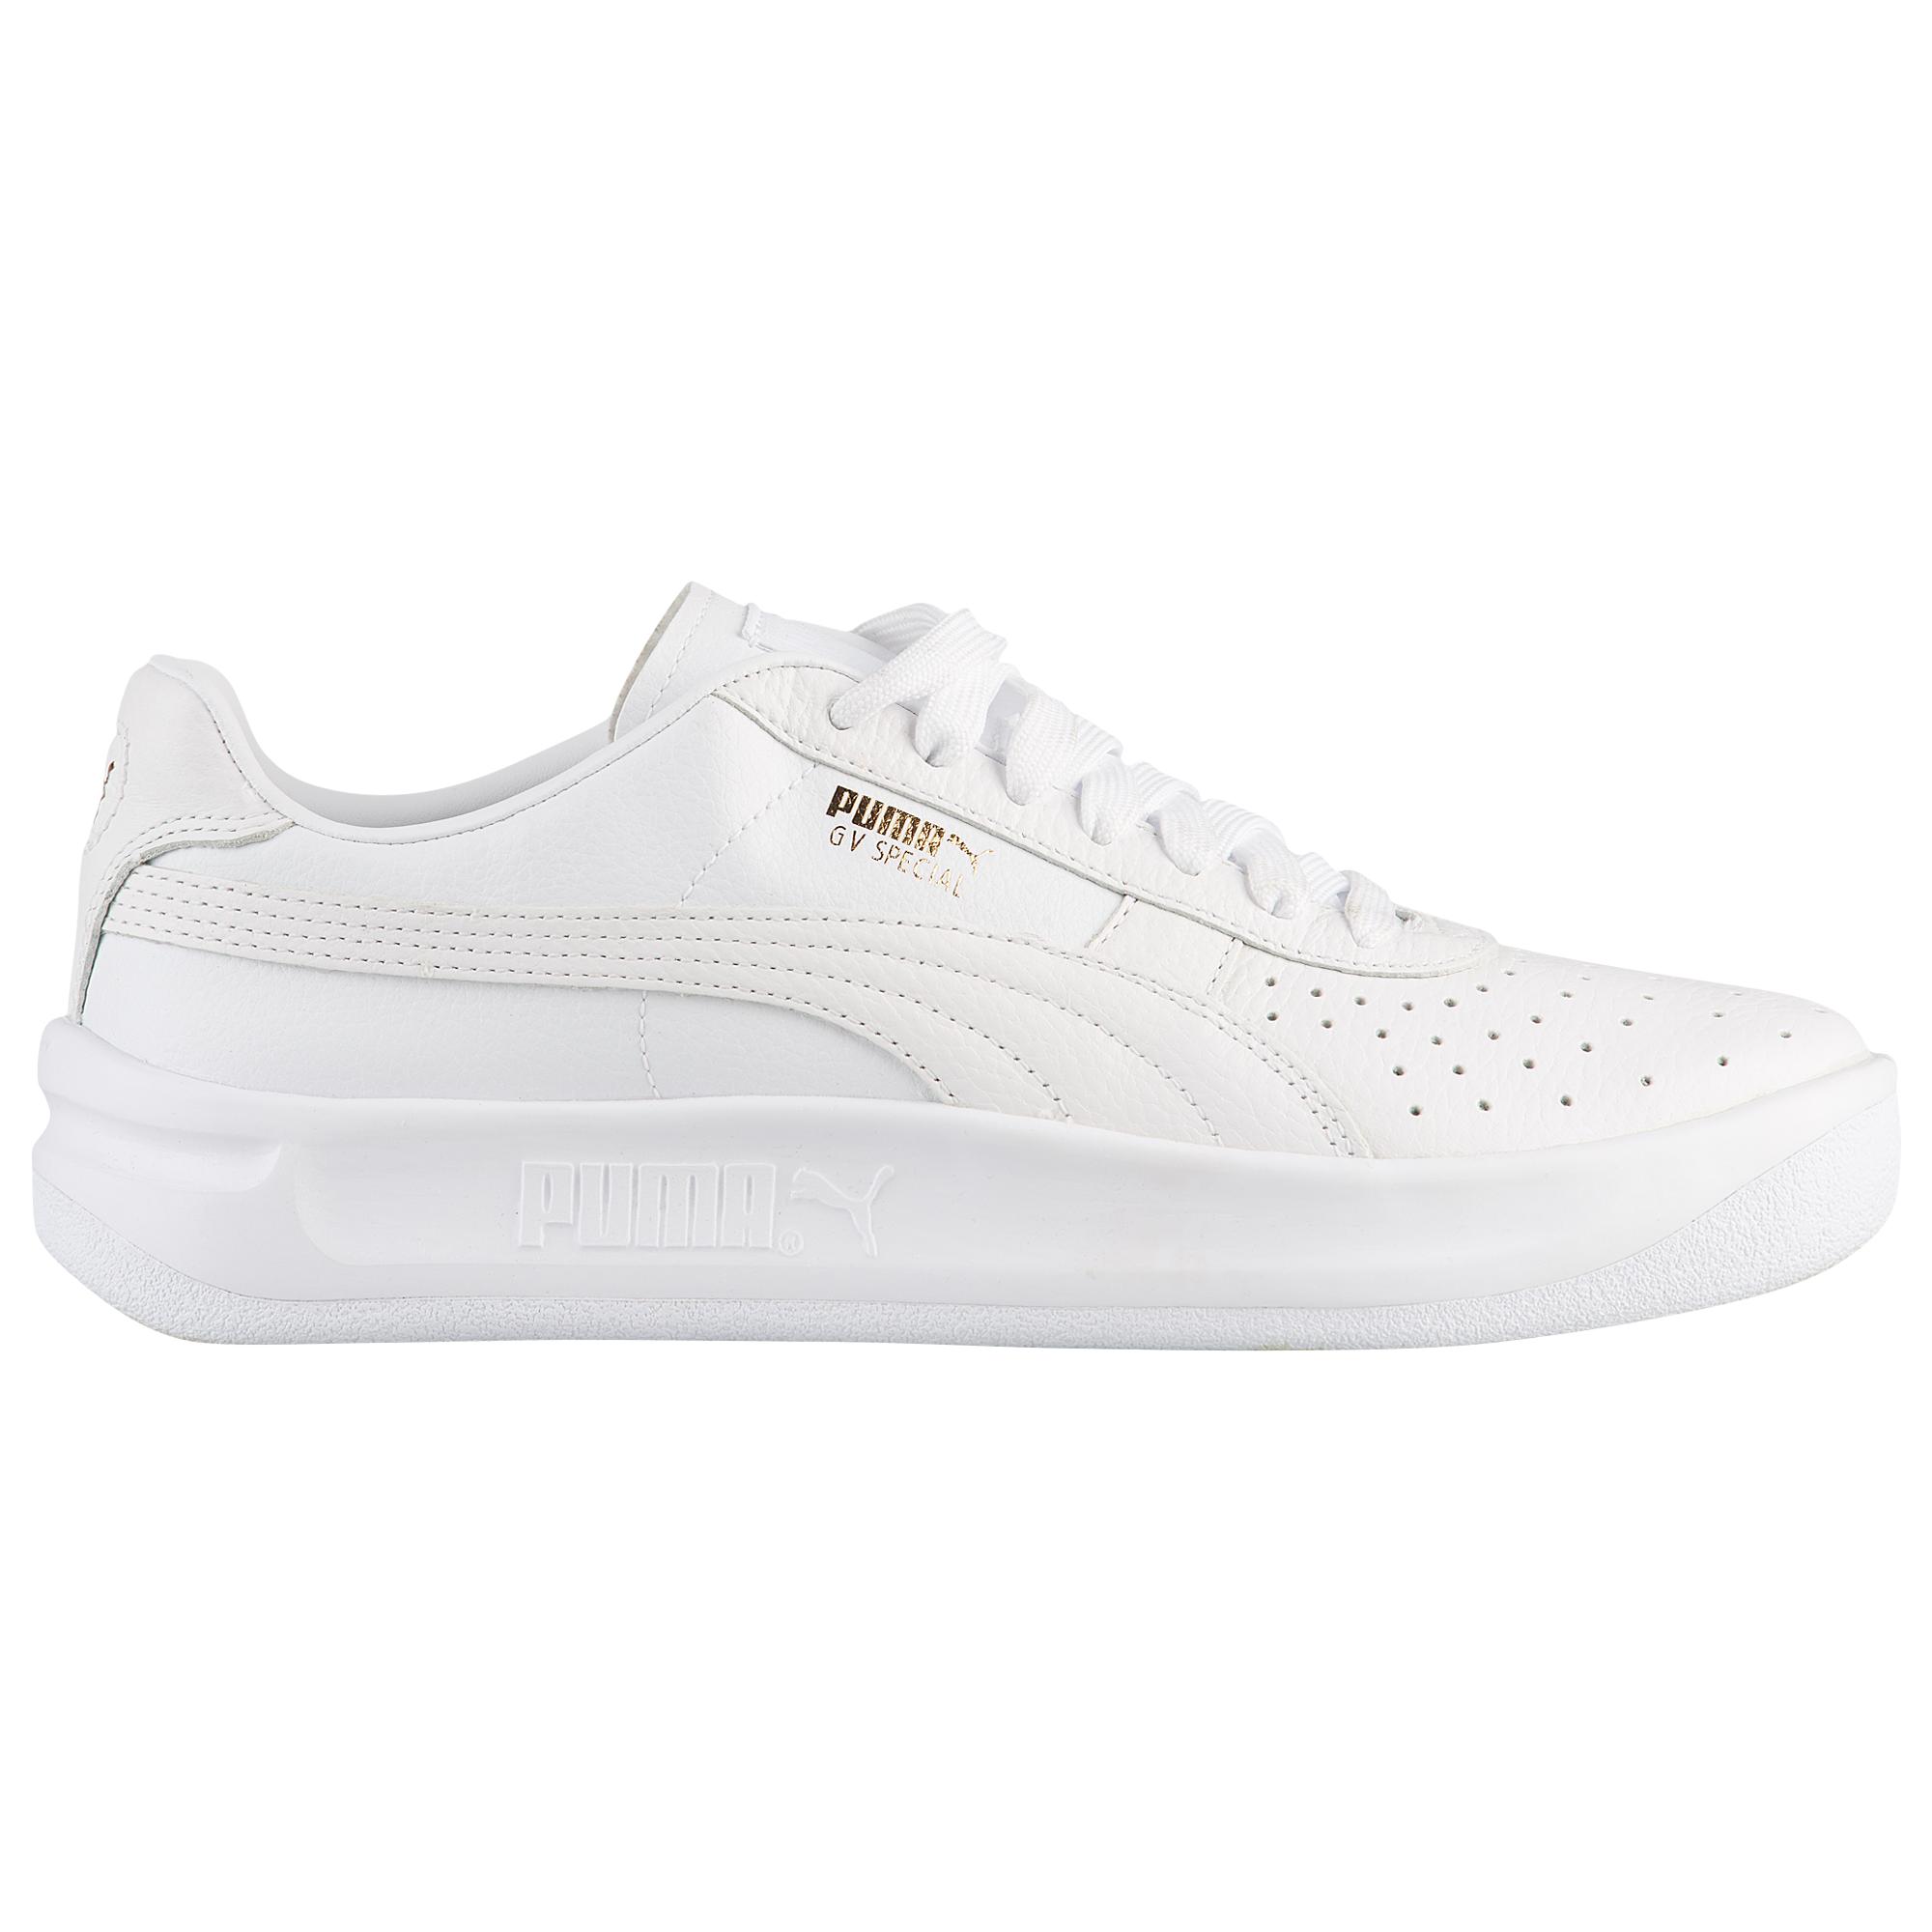 PUMA Leather Gv Special Sneakers in White- White (White) - Save 30% - Lyst